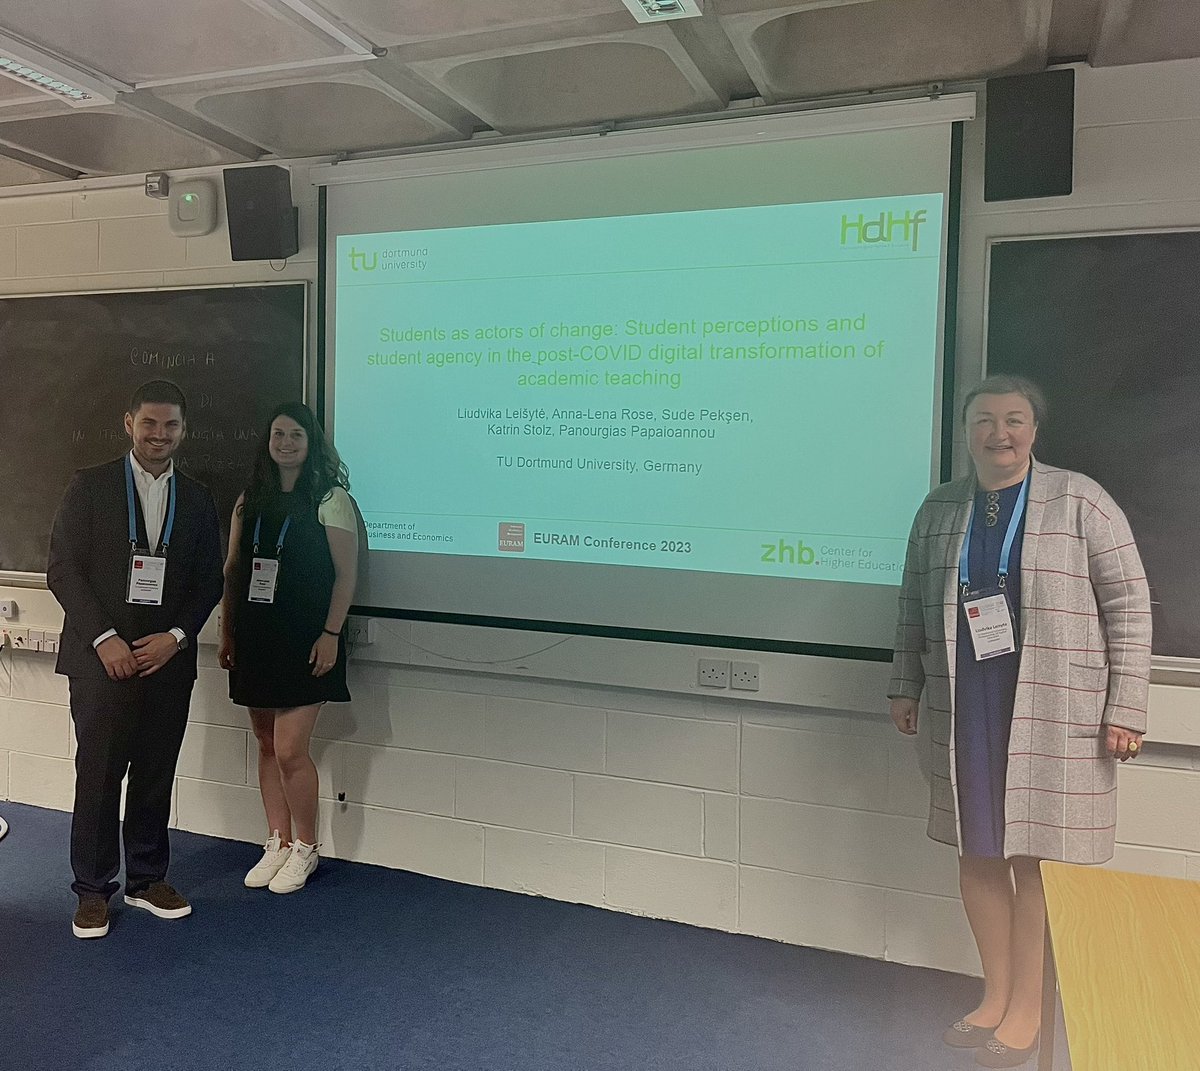 Our presentation “Students as actors of change: Student perceptions and student agency in the post-COVID digital transformation of academic teaching” took successfully place during @EURAM_BXL with the support of @inno_lehre and as part of the #STARK project @HdHf_TUDortmund